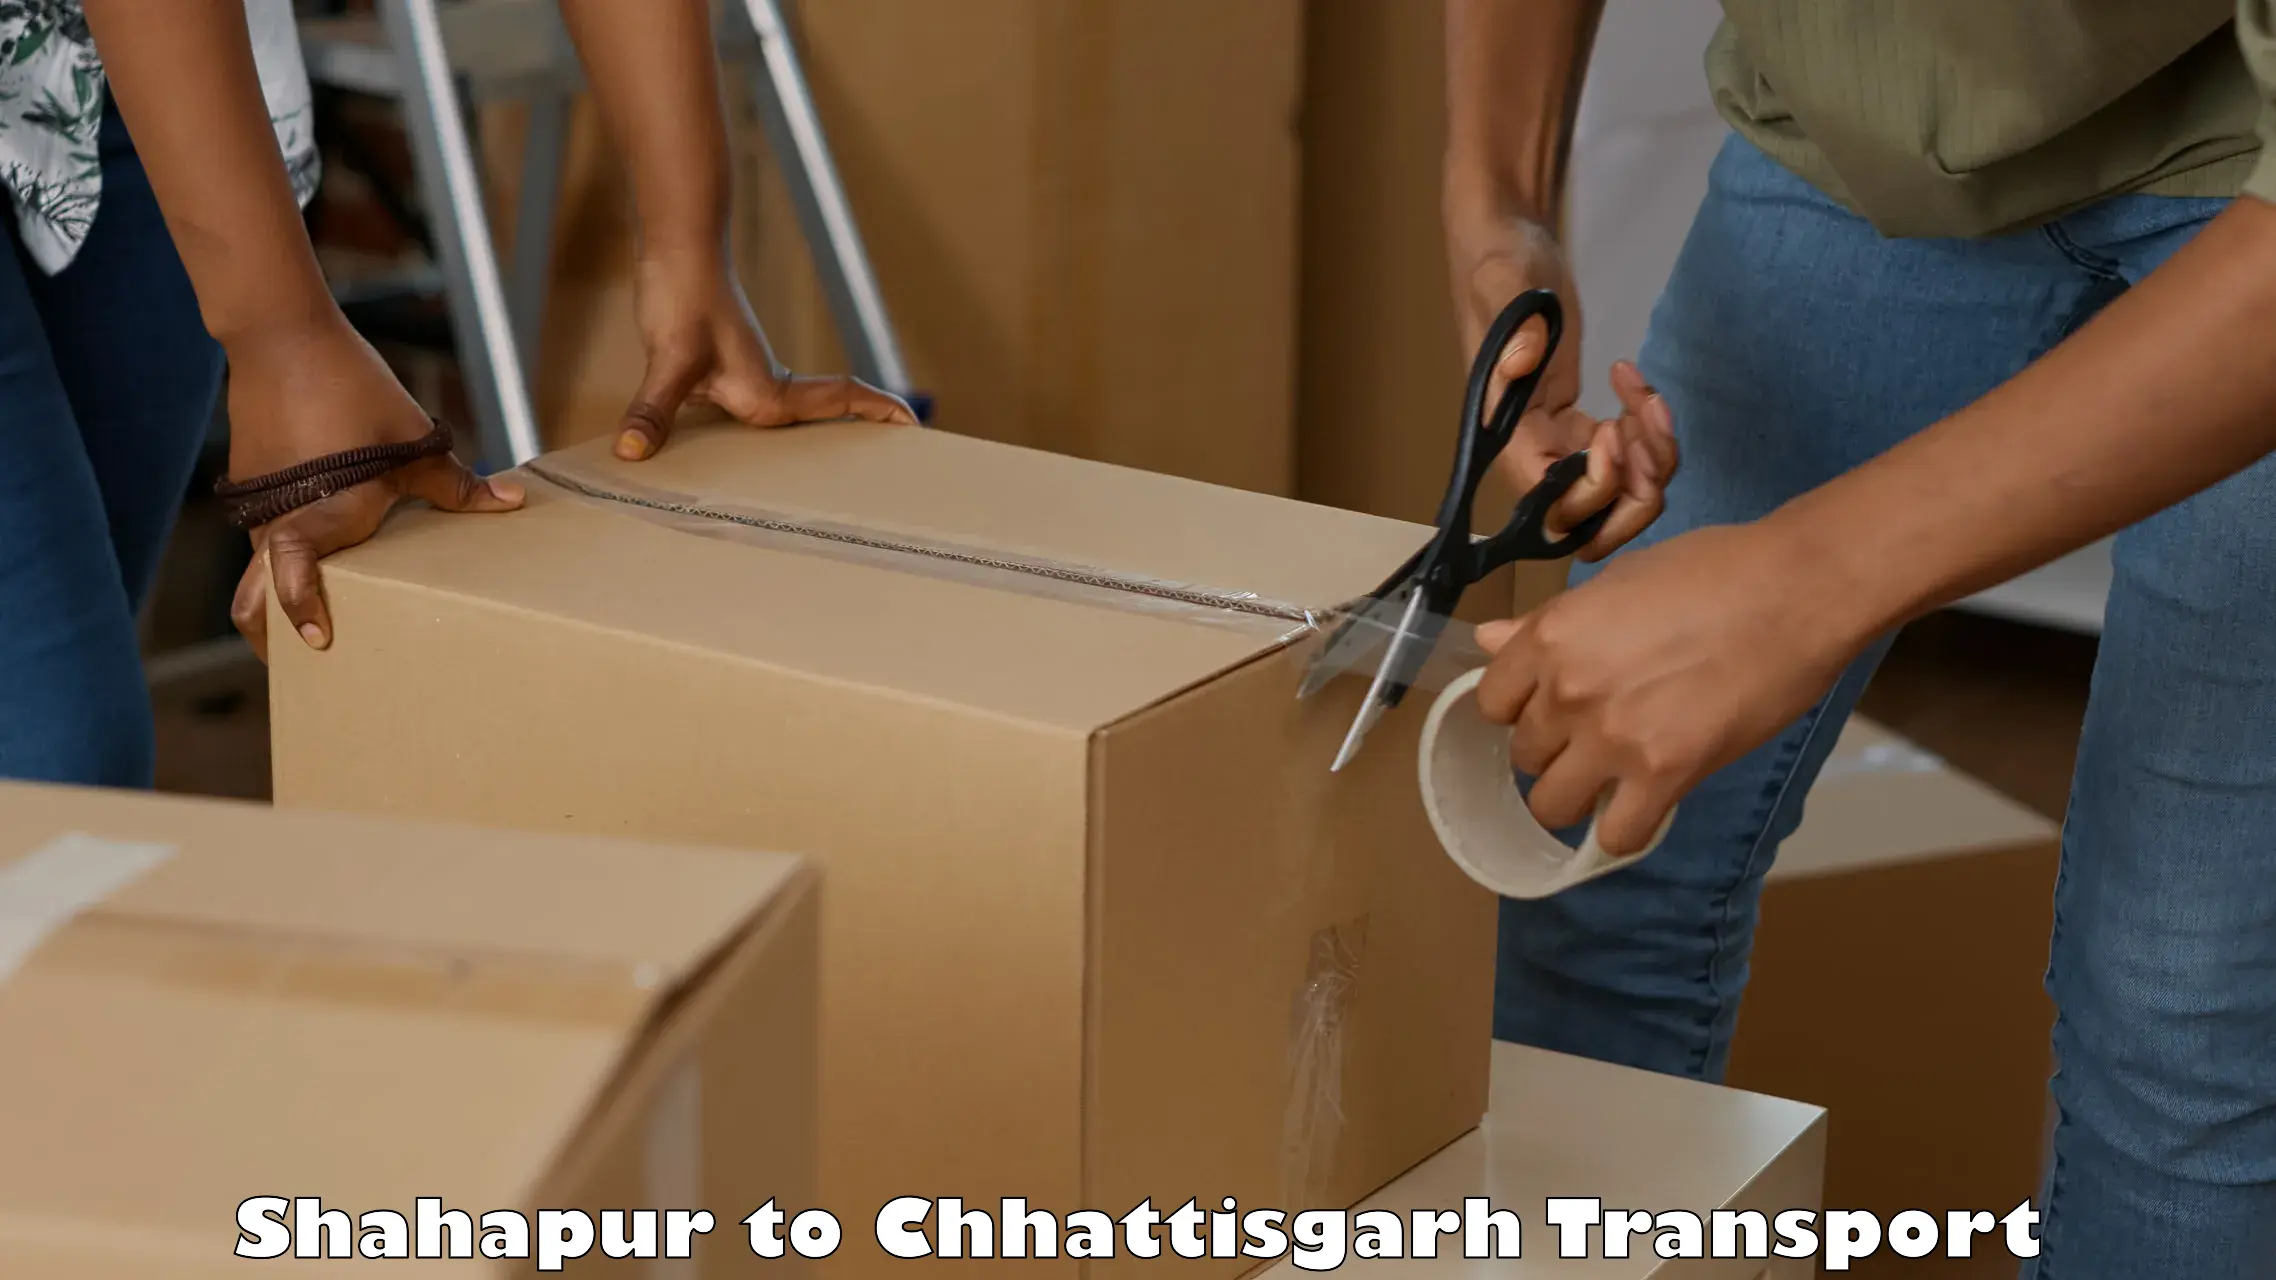 Delivery service Shahapur to Raigarh